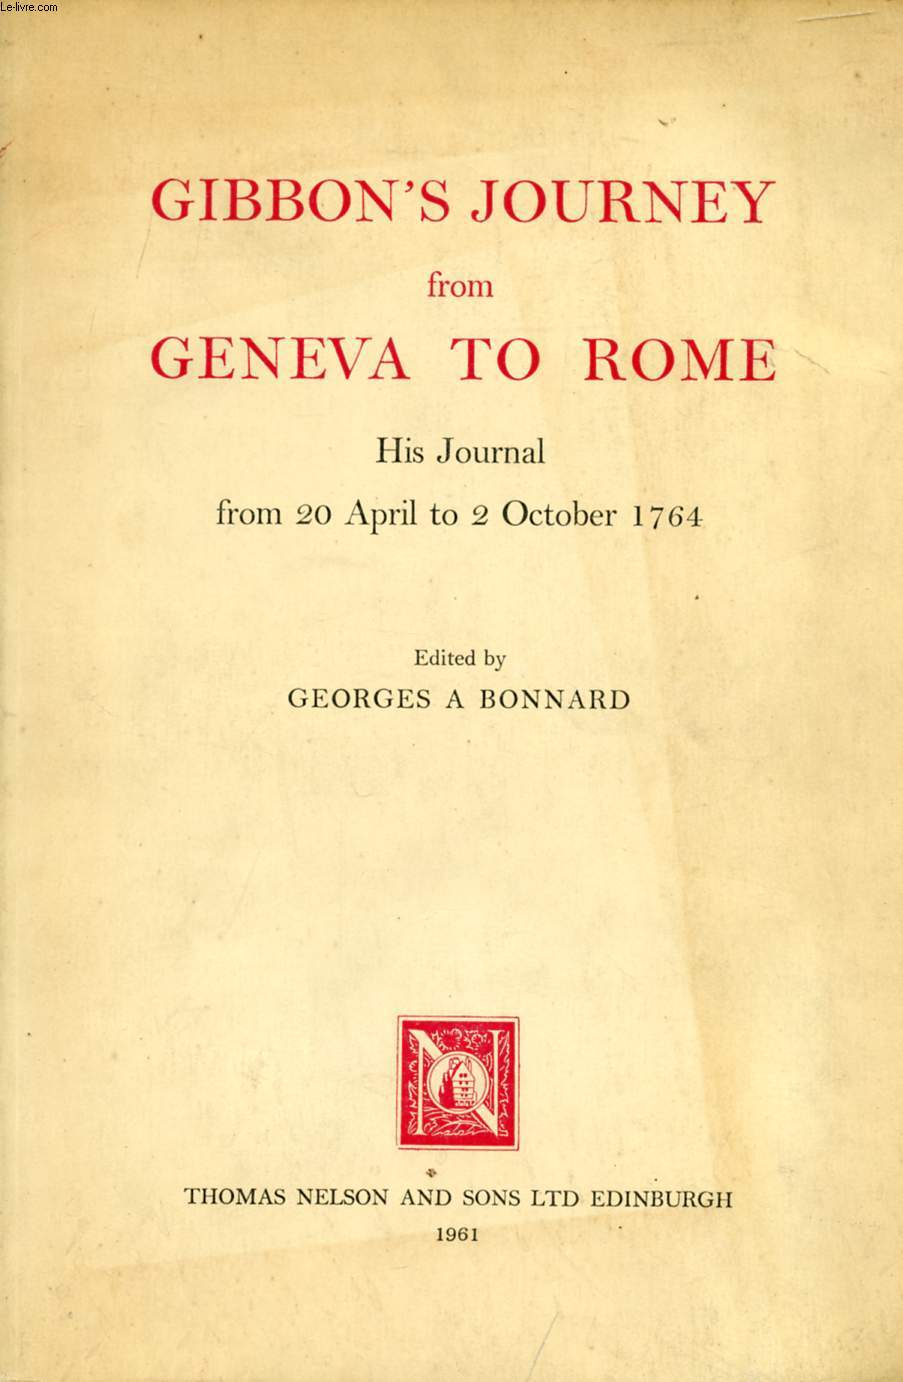 GIBBON'S JOURNEY FROM GENEVA TO ROME, HIS JOURNAL FROM 20 APRIL TO 2 OCTOBER